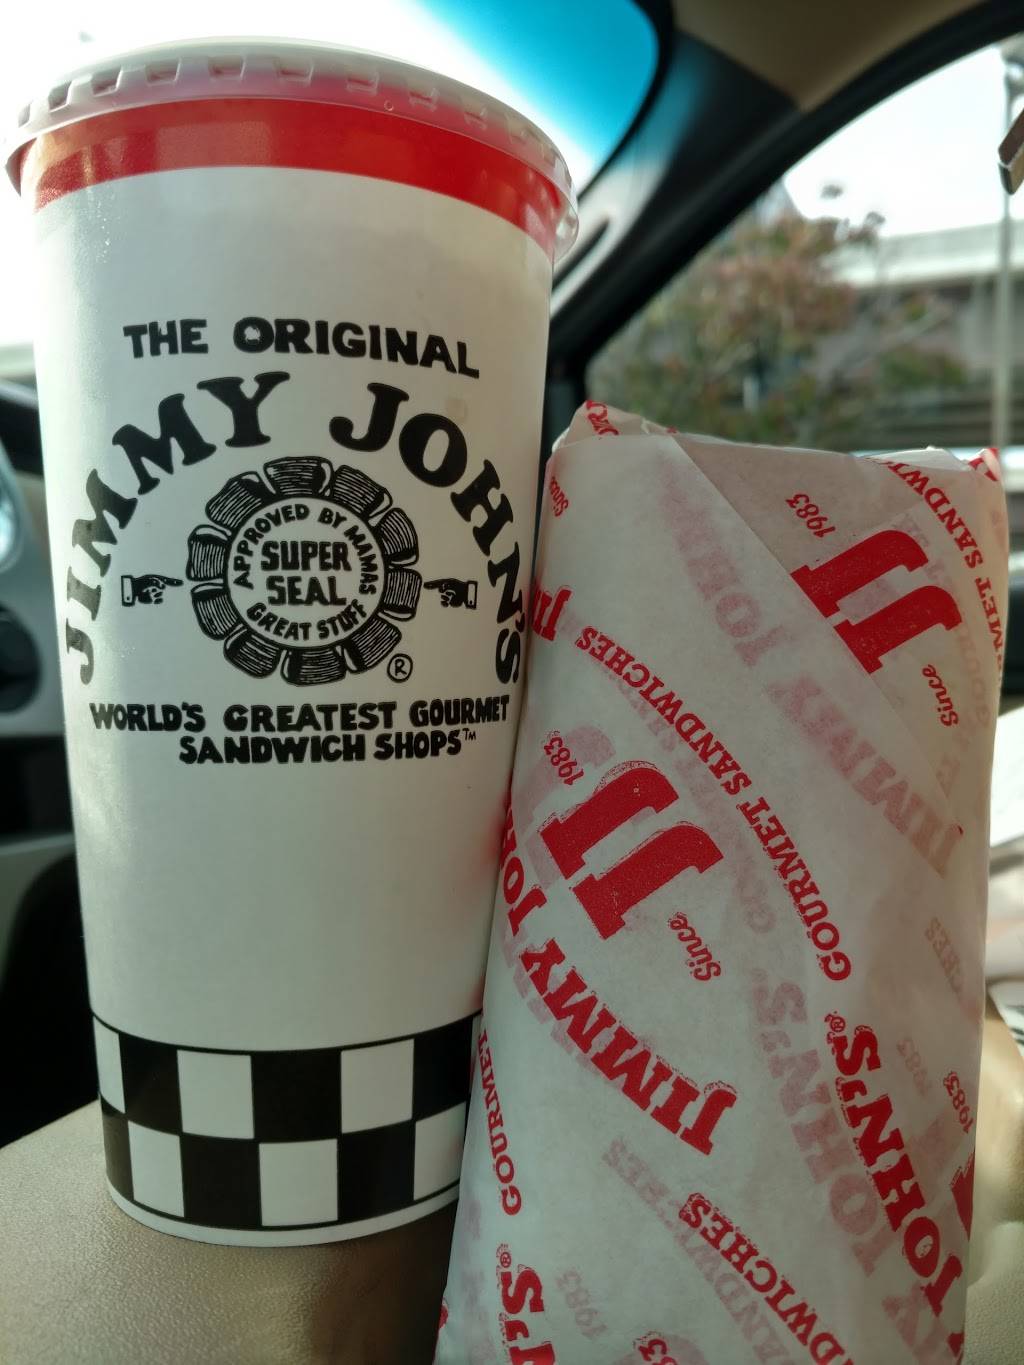 Jimmy Johns | meal delivery | 445 N 114th St, Omaha, NE 68154, USA | 4029328585 OR +1 402-932-8585